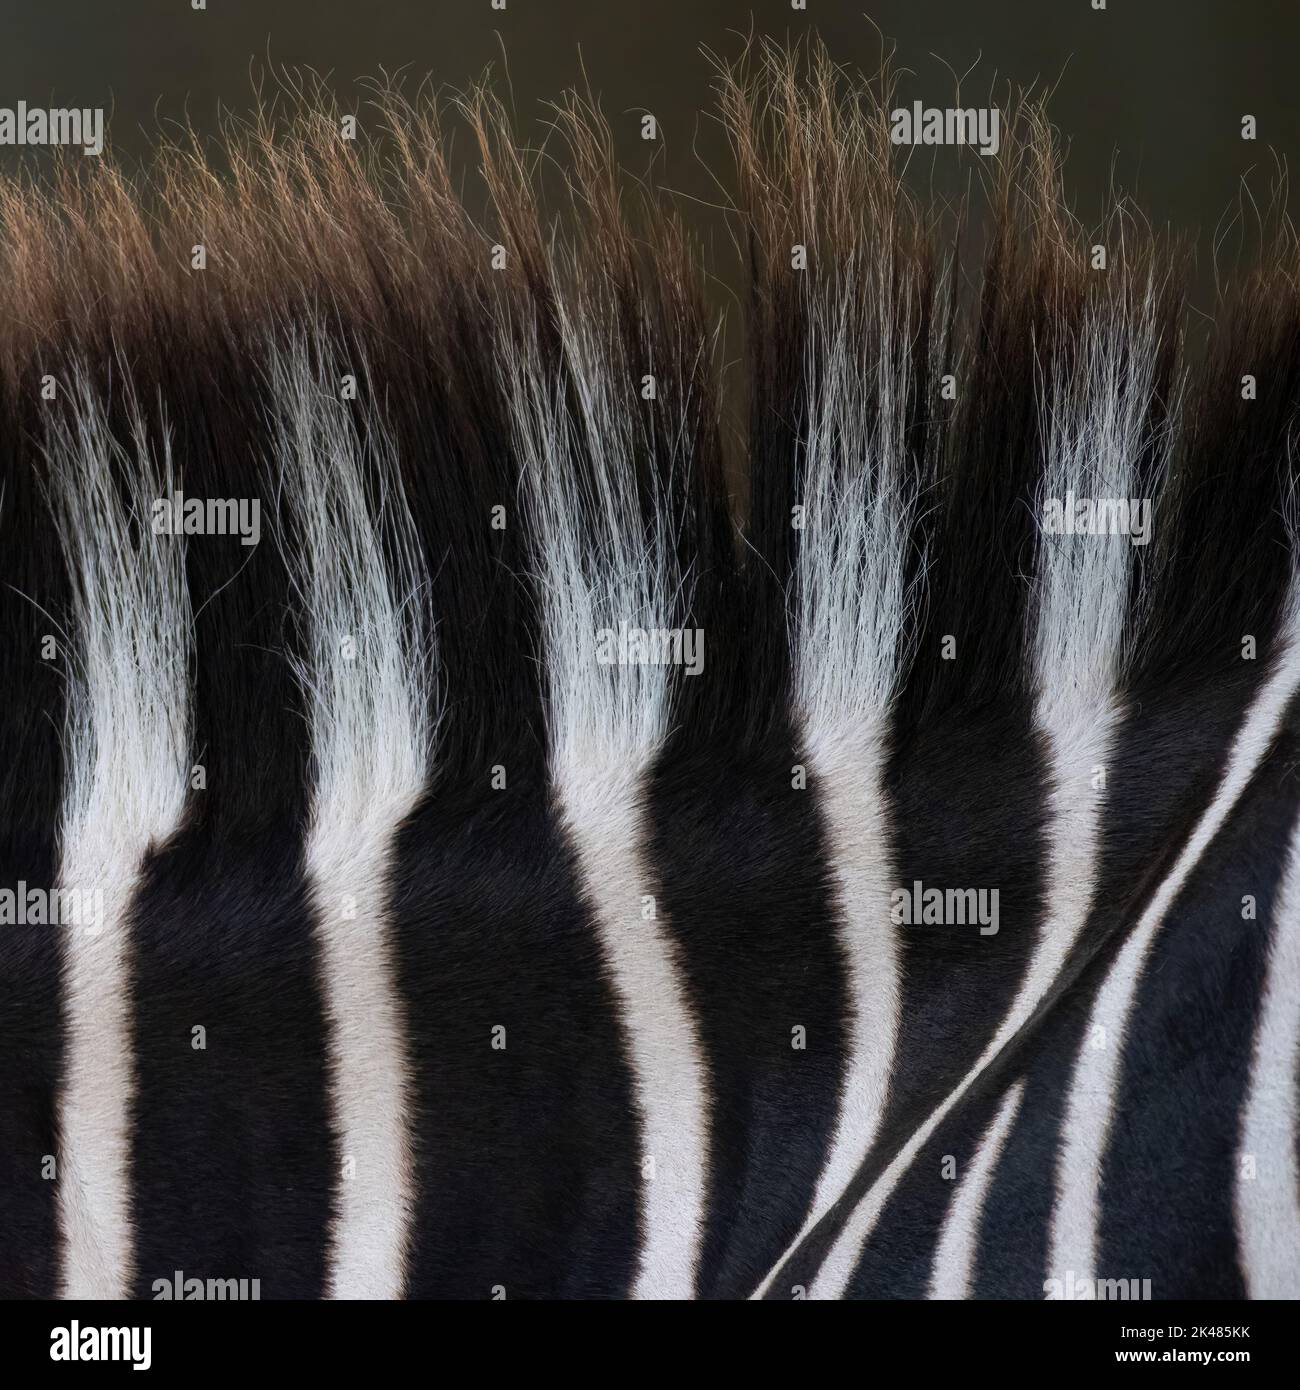 Extreme close-up of the black and white stripes of fur on a zebra with its mane. Photographed at the Houston Zoo in Houston, Texas. Stock Photo